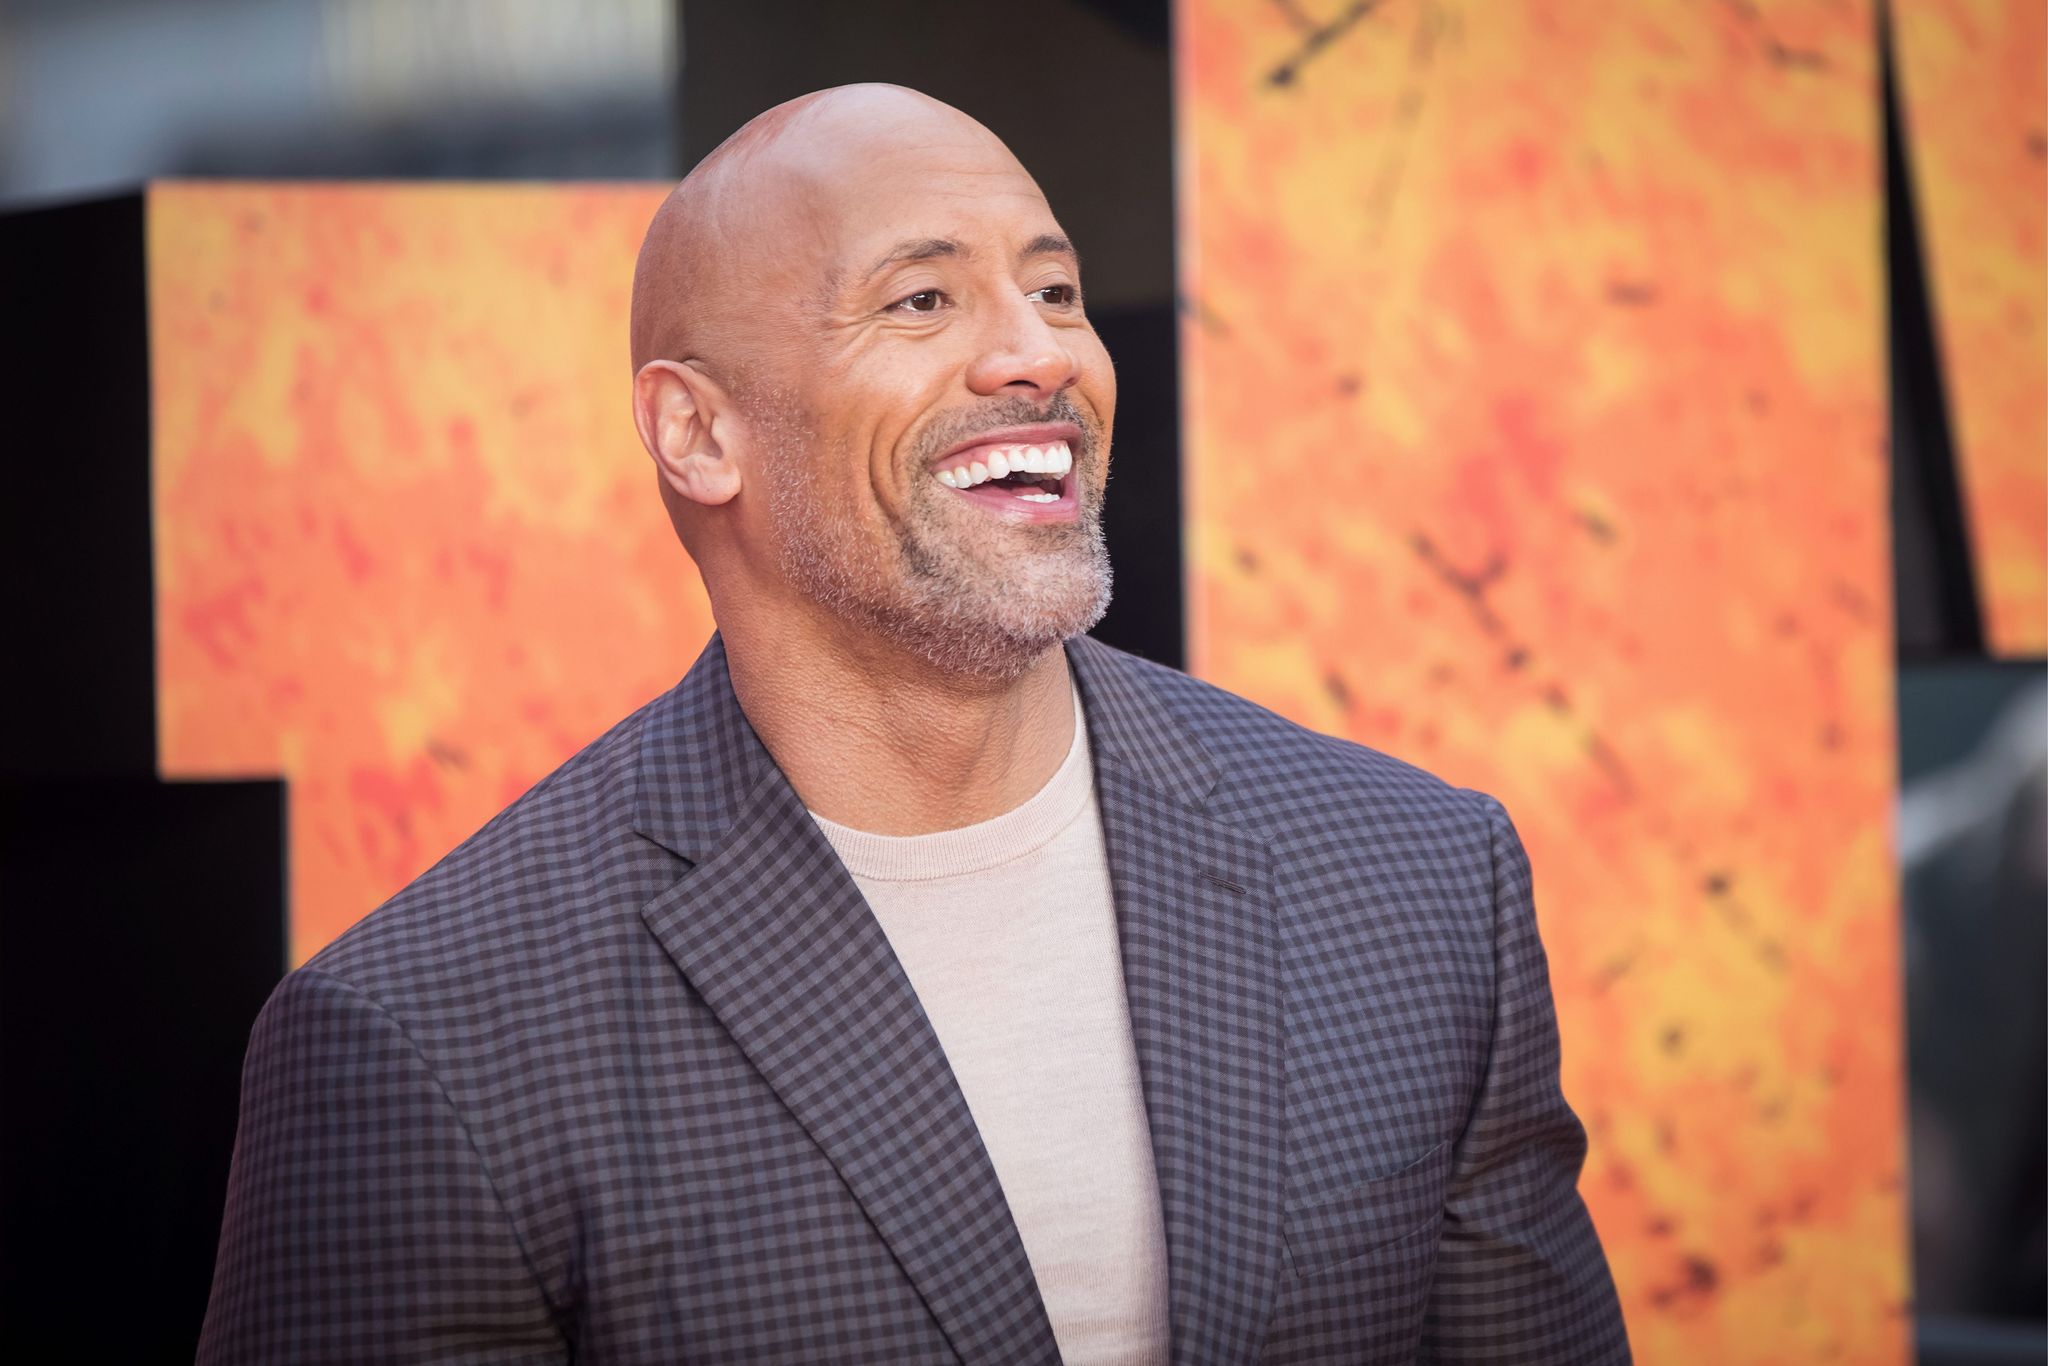 Dwayne Johnson says The Rock not ready to run for president